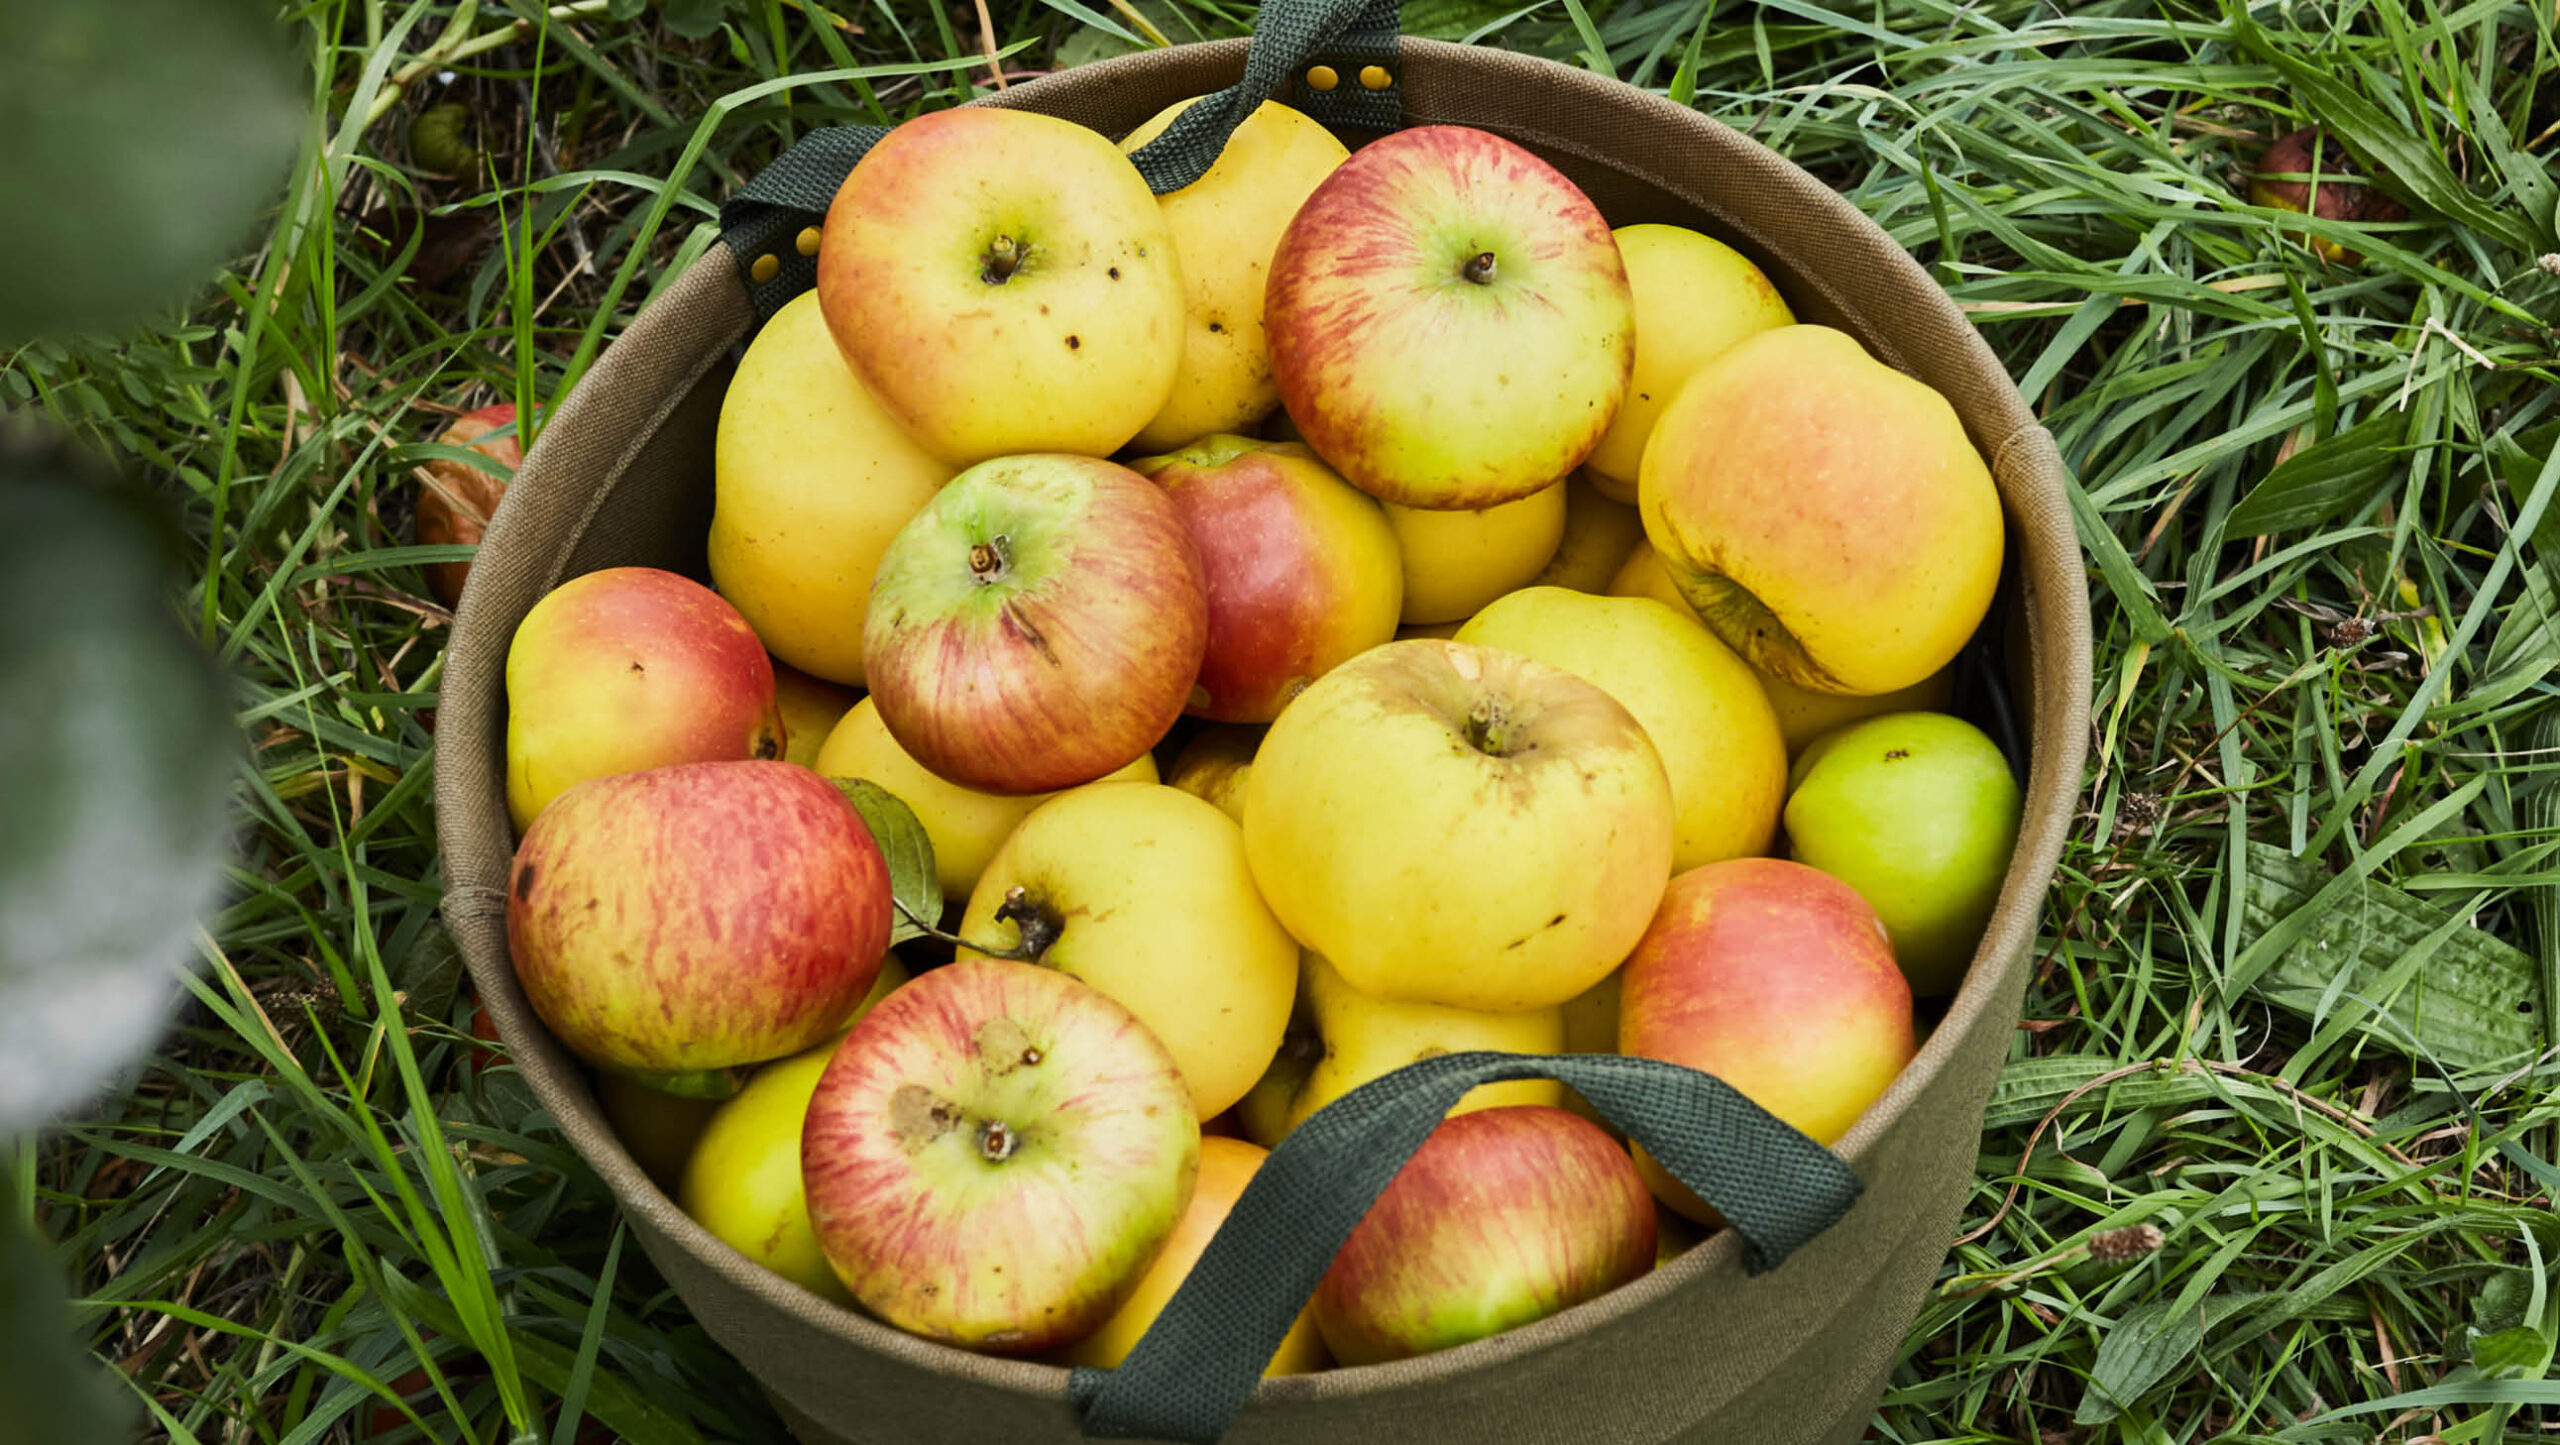 When choosing apple trees to plant, look for varieties that are grafted on dwarf rootstock.